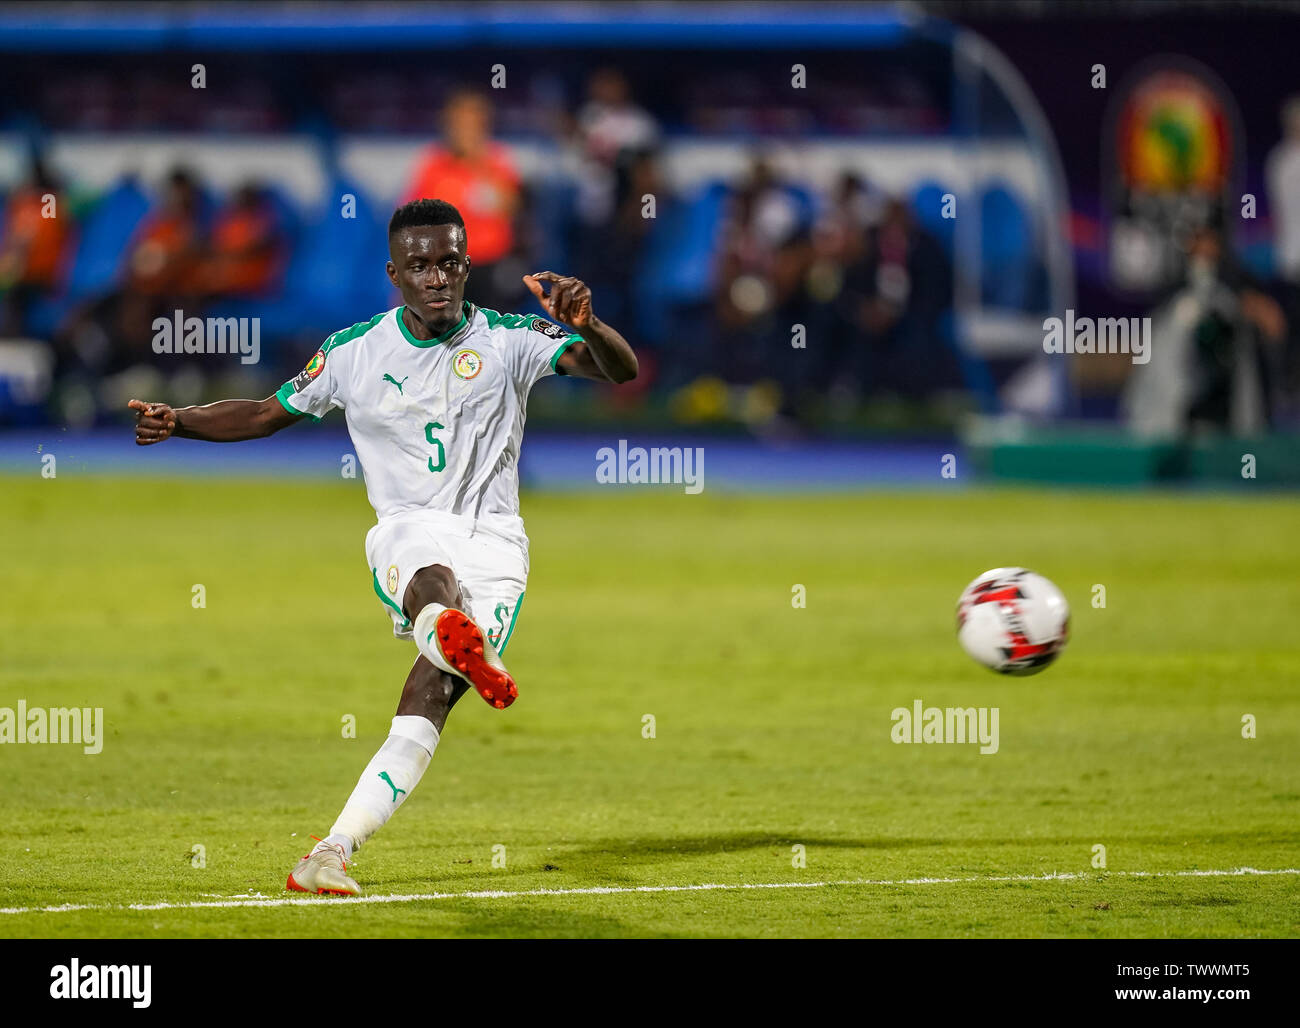 Cairo, Egypt. 23rd June, 2019. Idrissa Gana Gueye of Senegal shooting on goal during the 2019 African Cup of Nations match between Senegal and Tanzania at the 30 November Stadium in Cairo, Egypt. Ulrik Pedersen/CSM/Alamy Live News Stock Photo